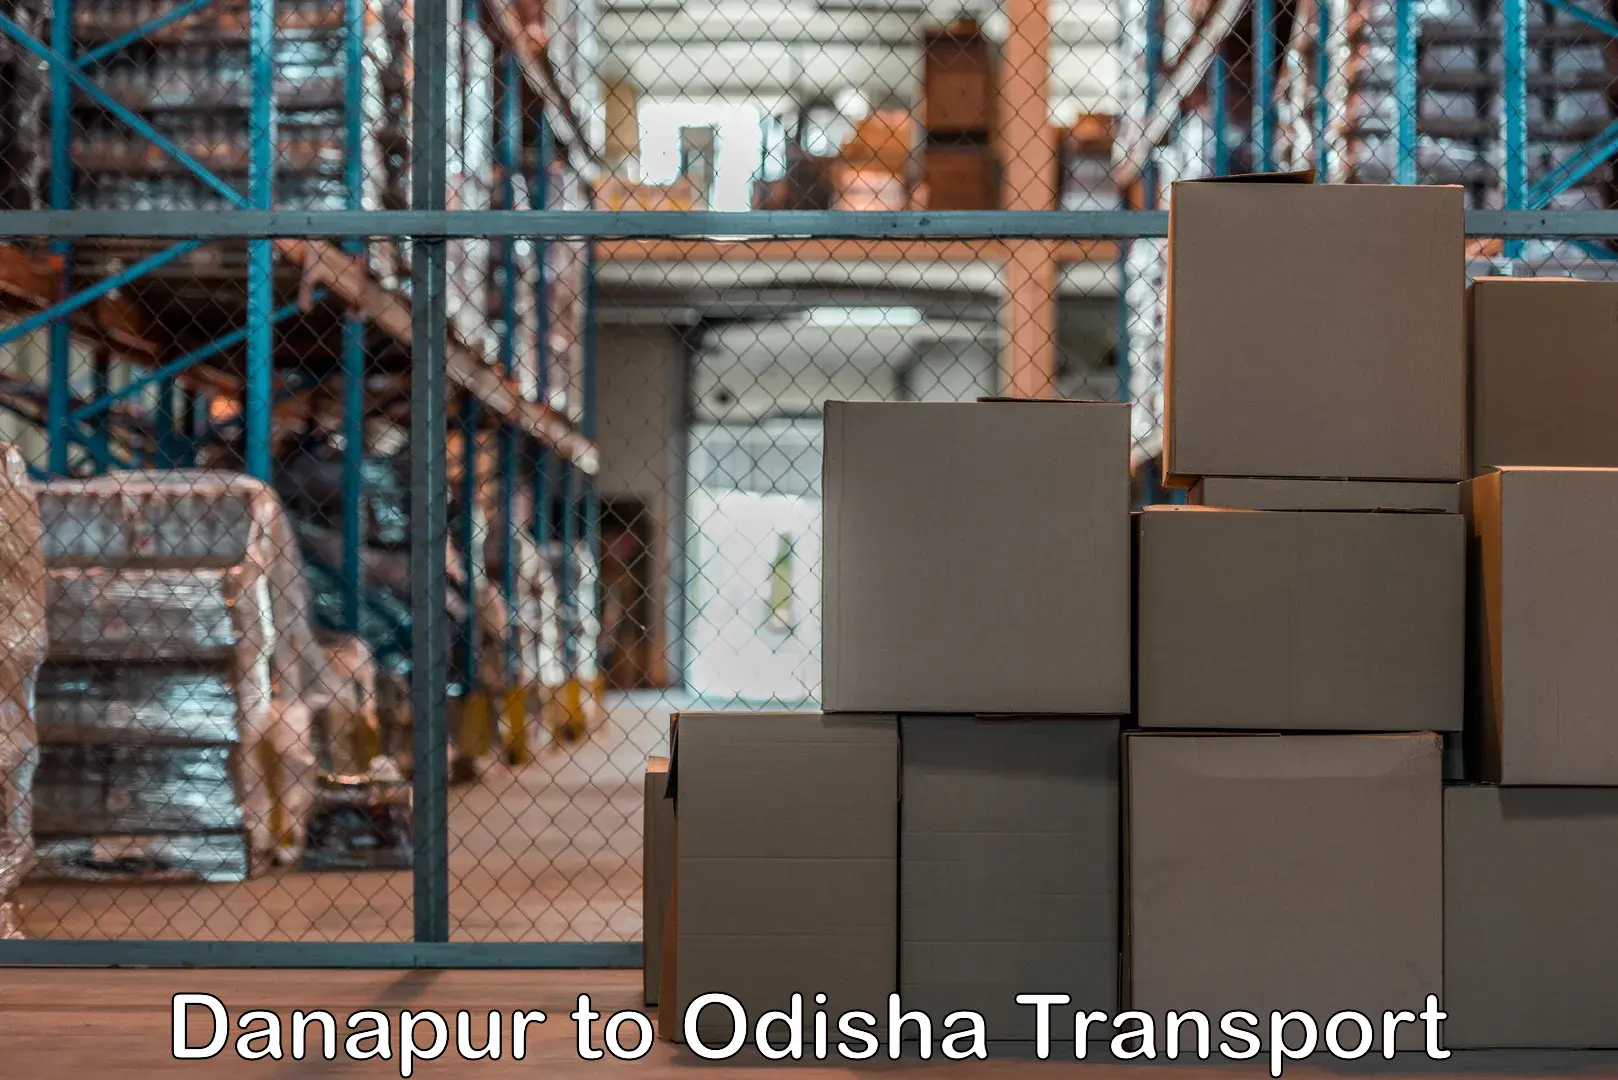 Land transport services in Danapur to Mathili